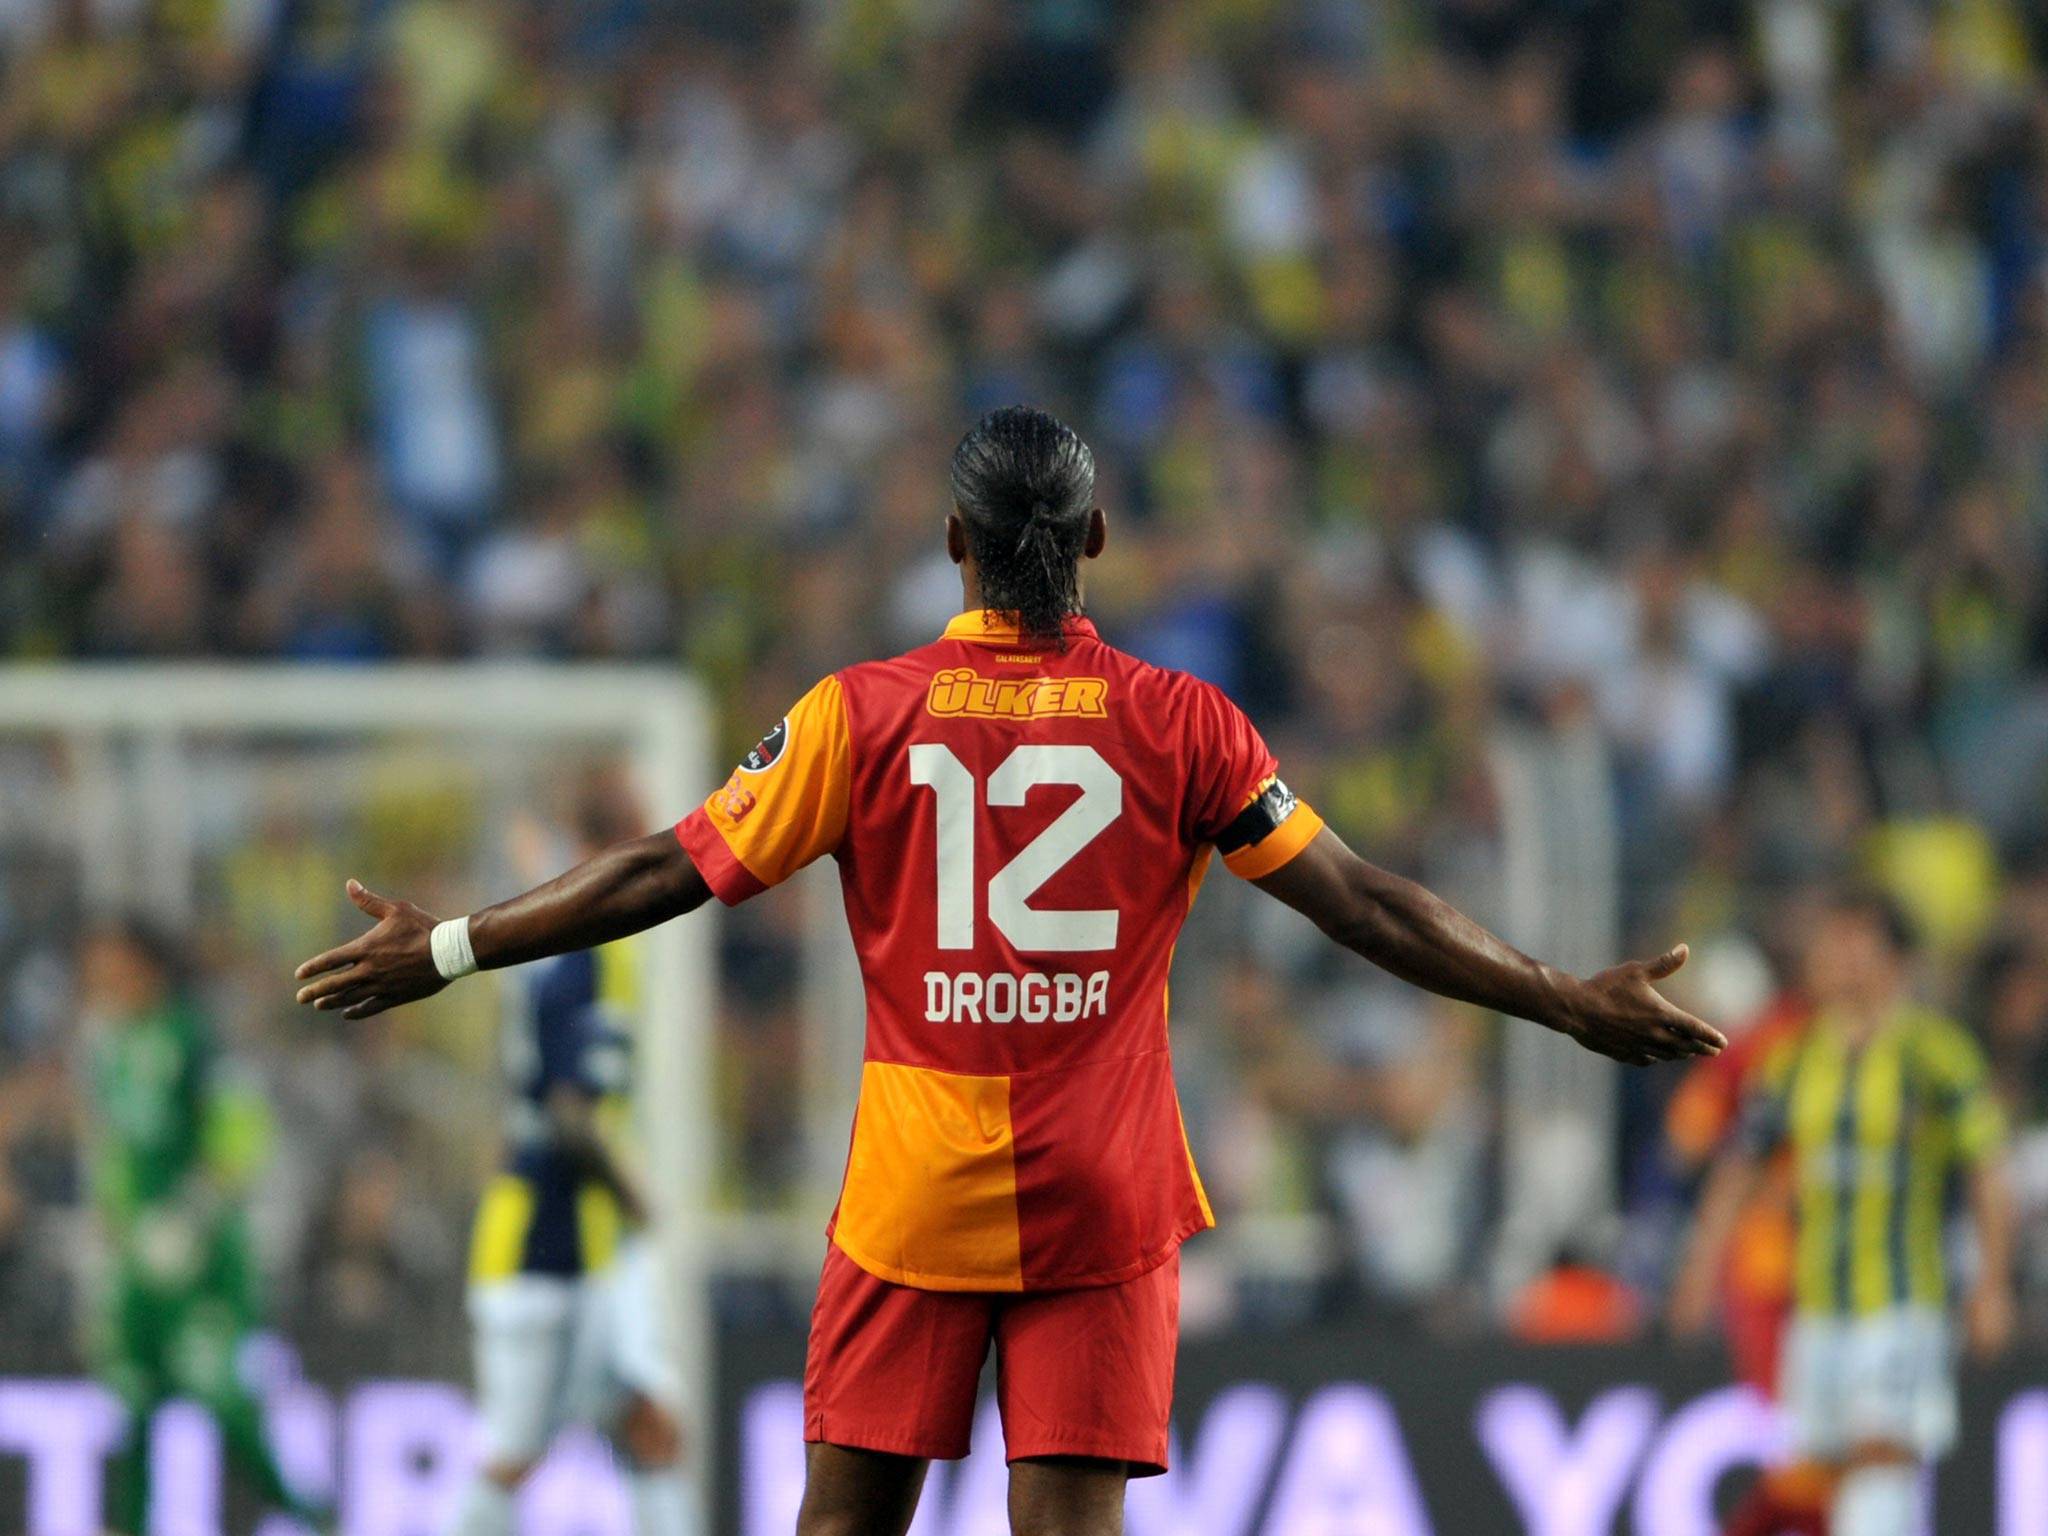 The player of Galatasaray Didier Drogba scored a goal Desktop wallpapers  1024x768